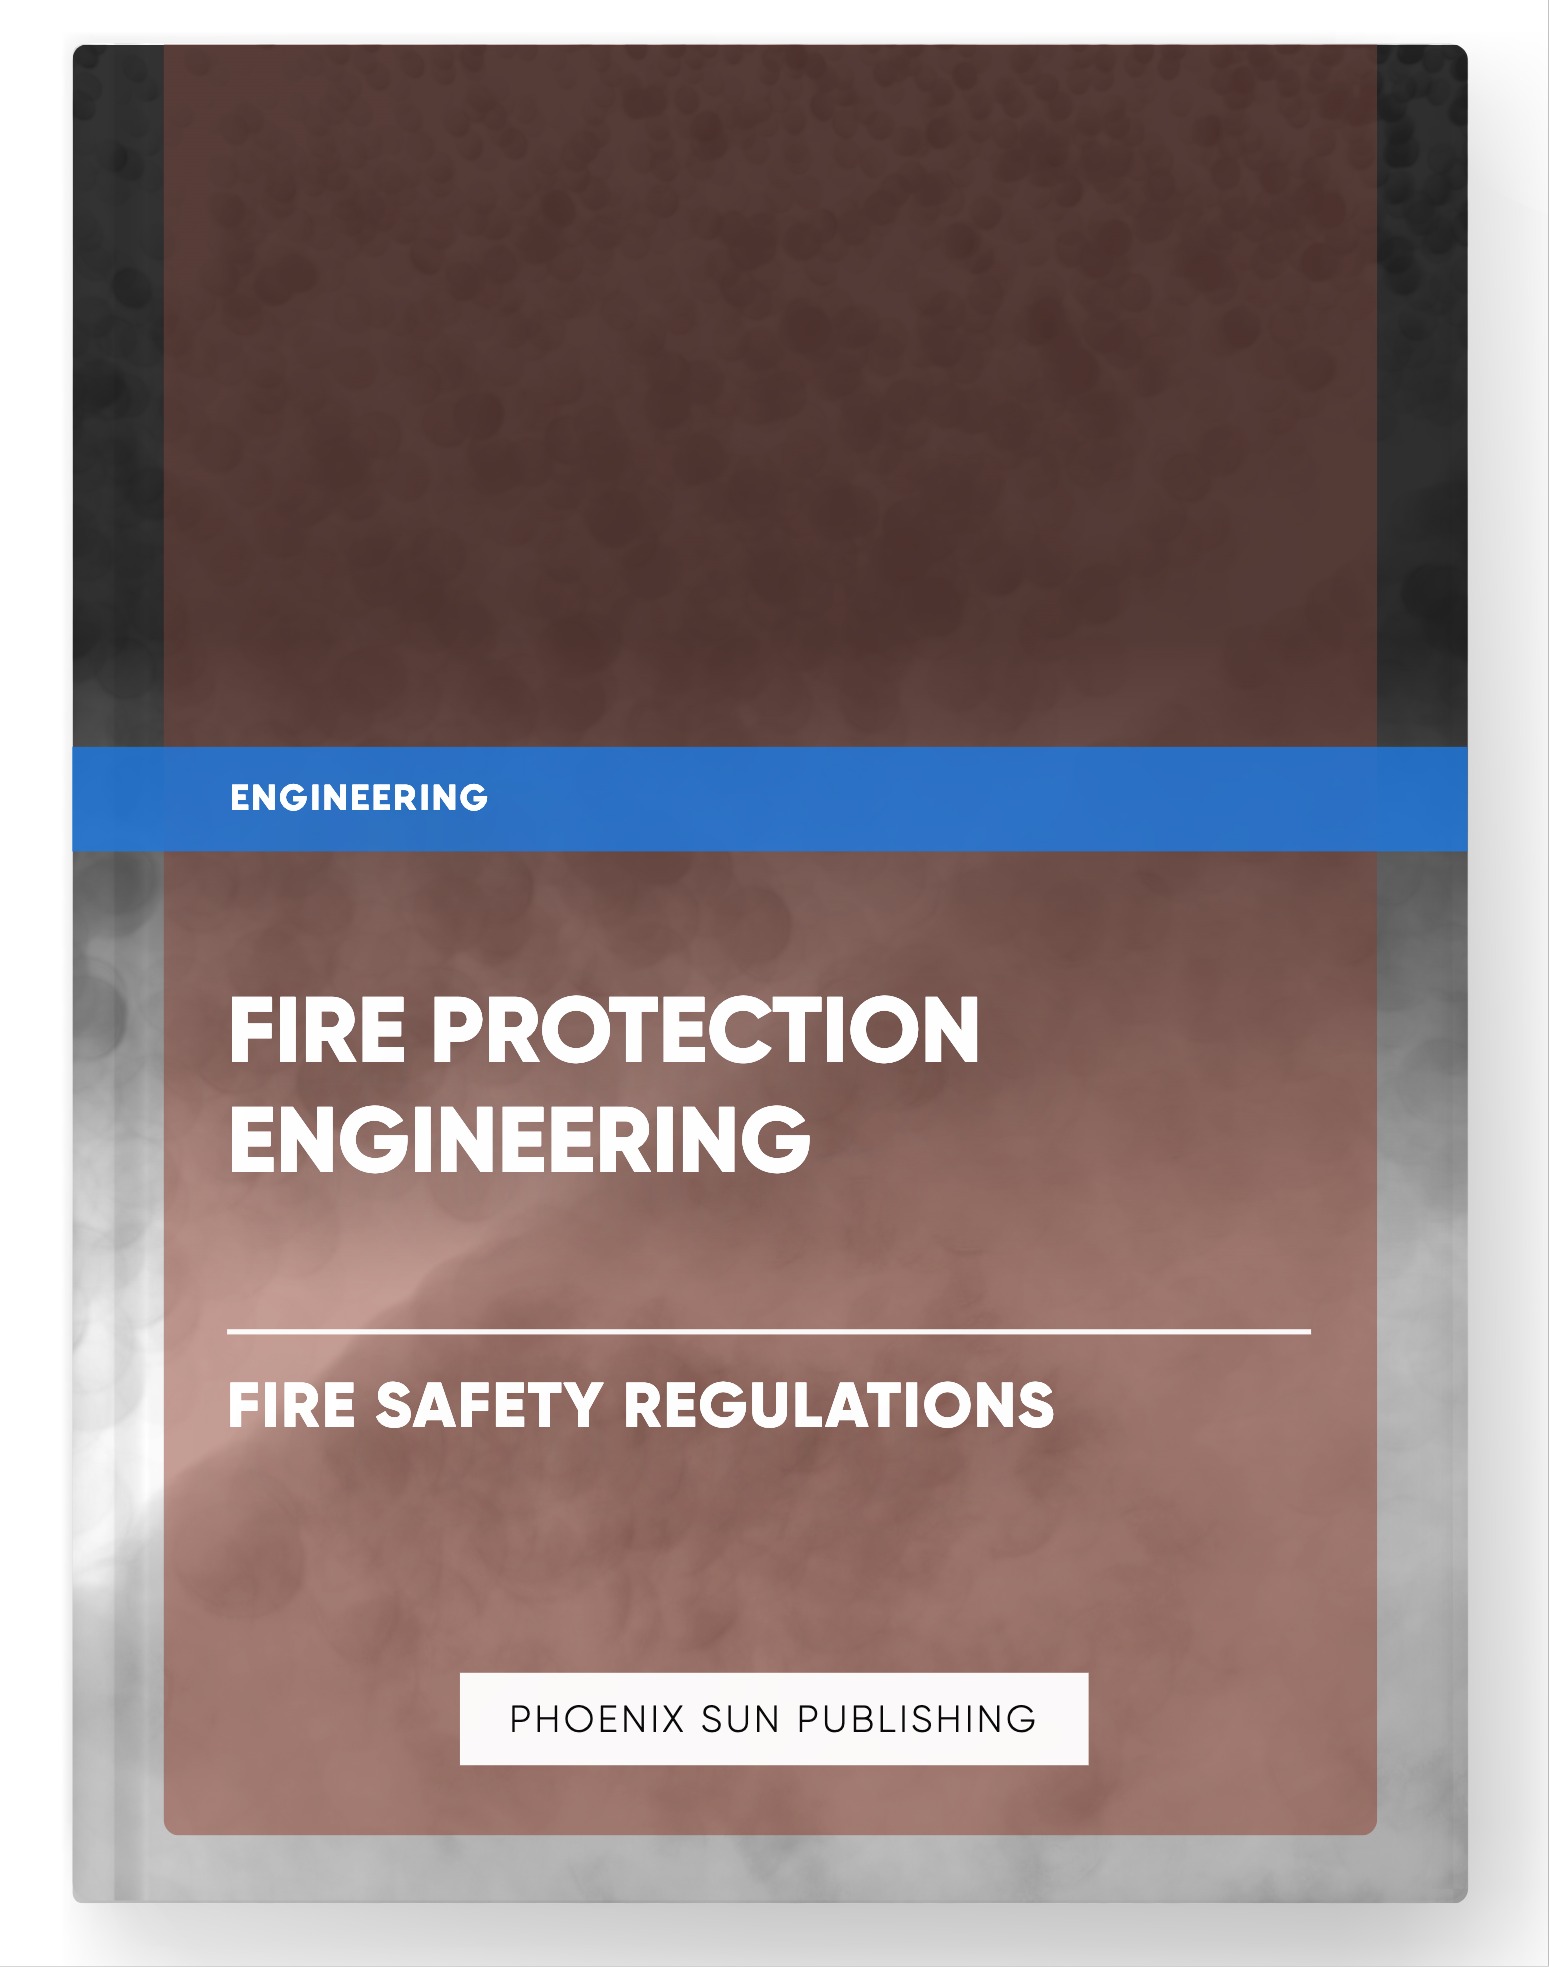 Fire Protection Engineering – Fire Safety Regulations